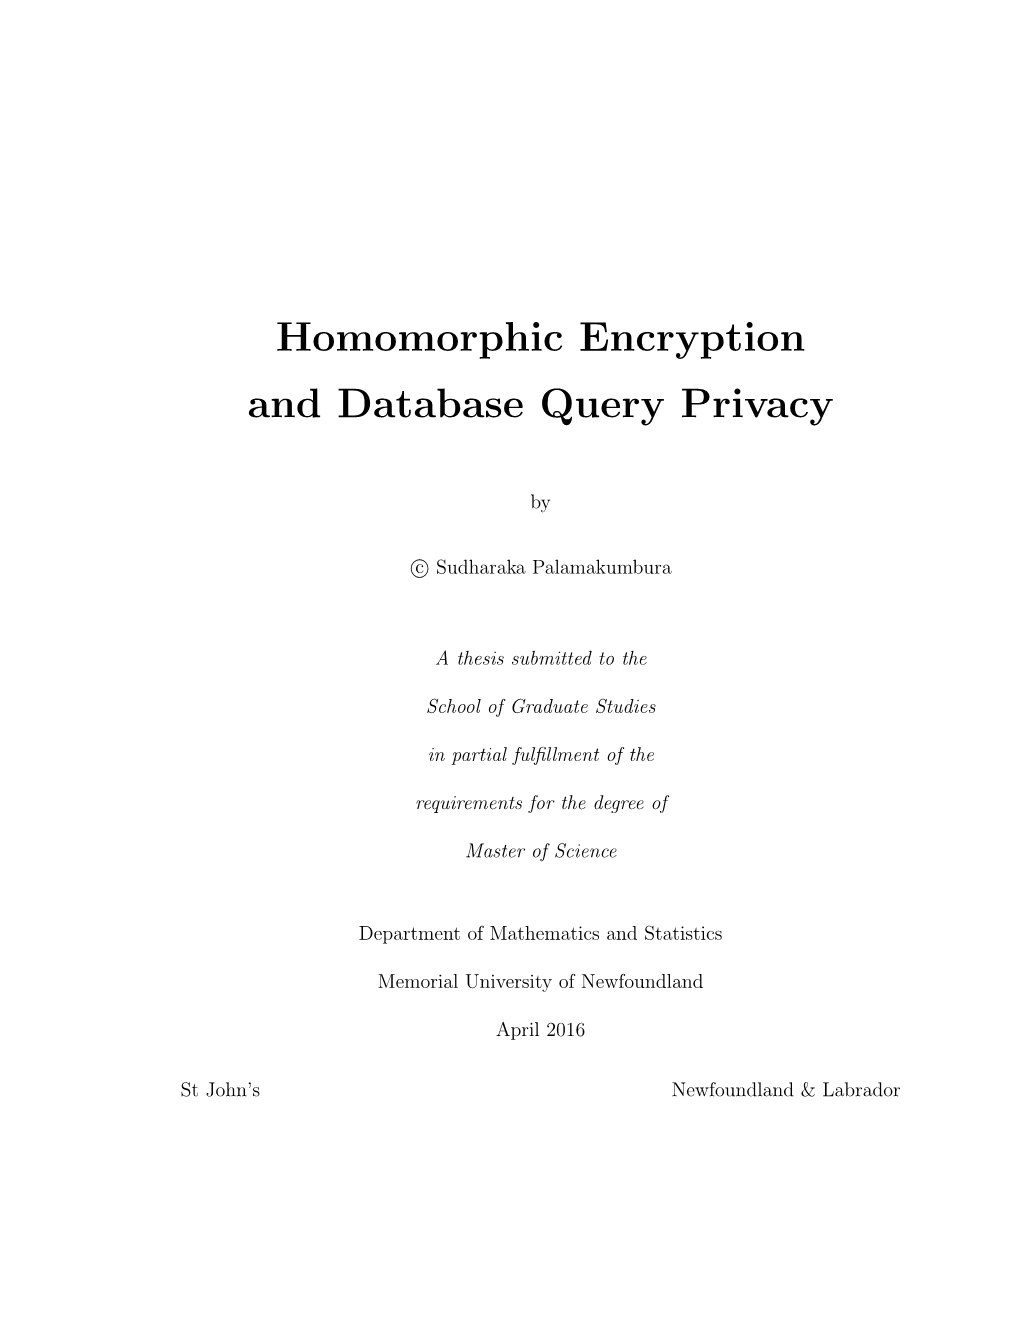 Homomorphic Encryption and Database Query Privacy